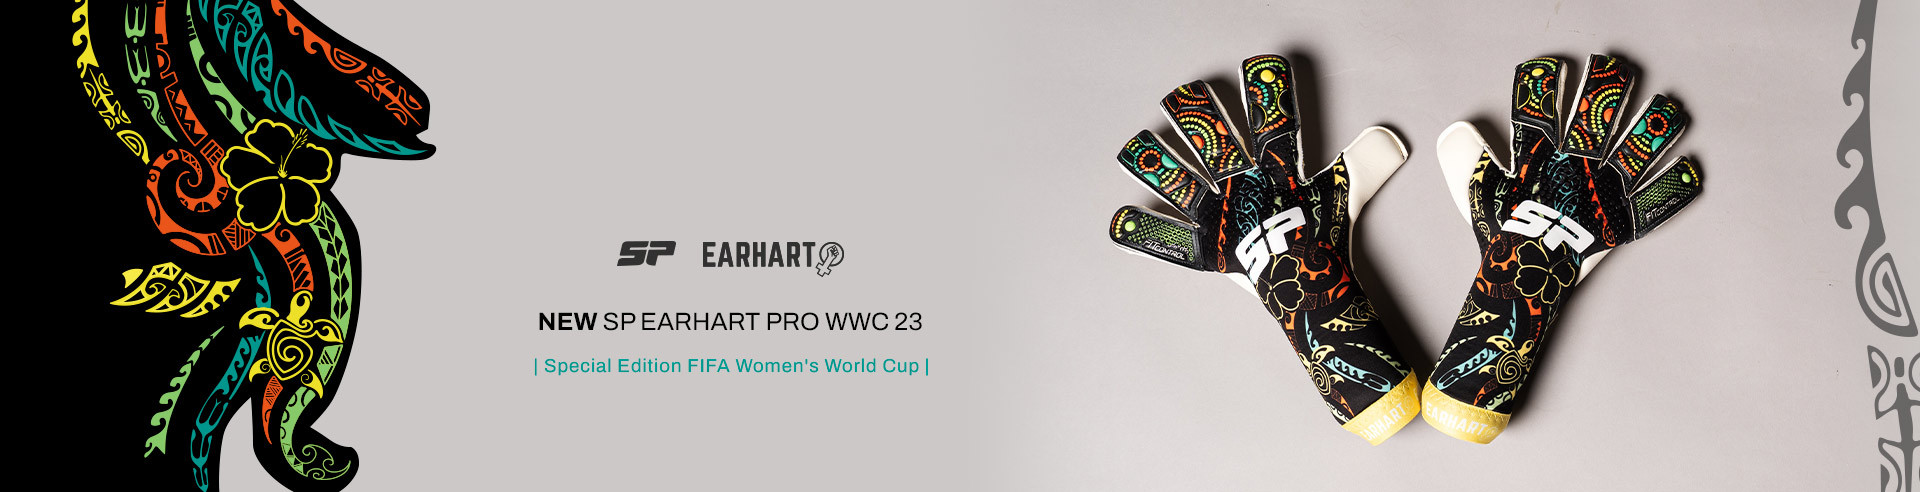 SP EARHART PRO WWC 2023 ALL